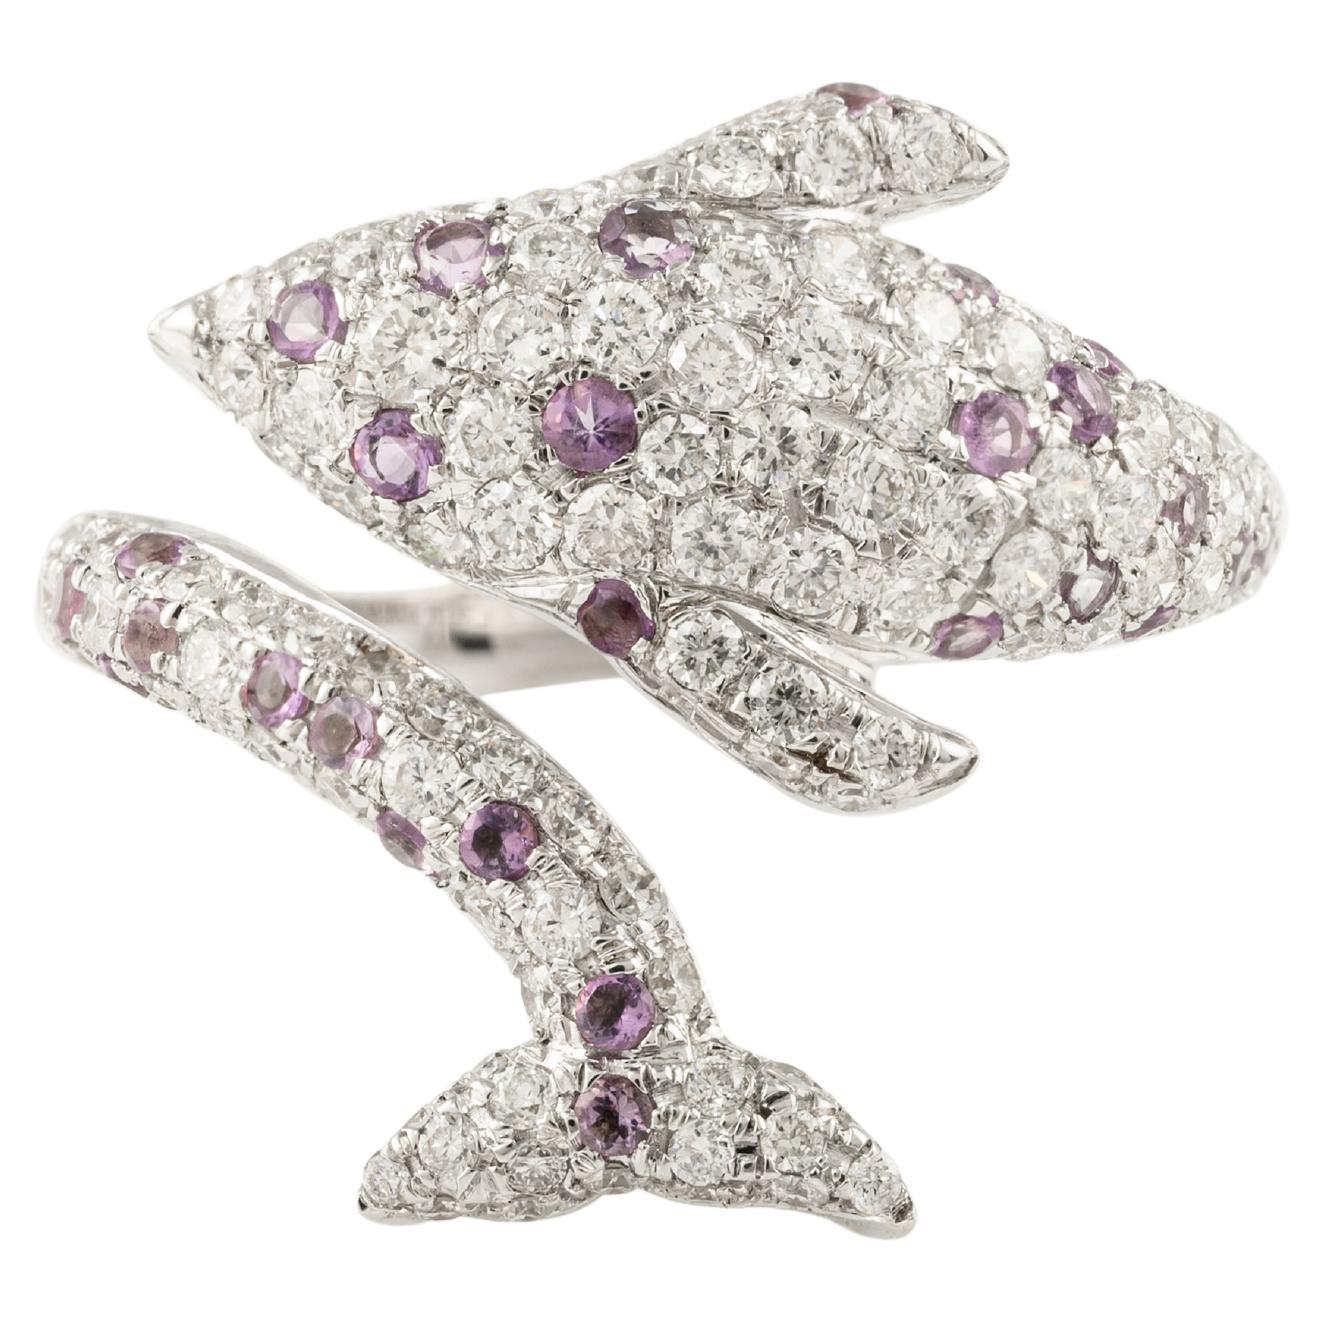 For Sale:  18k Solid White Gold Pave Set Amethyst and Diamond Dolphin Bypass Ring